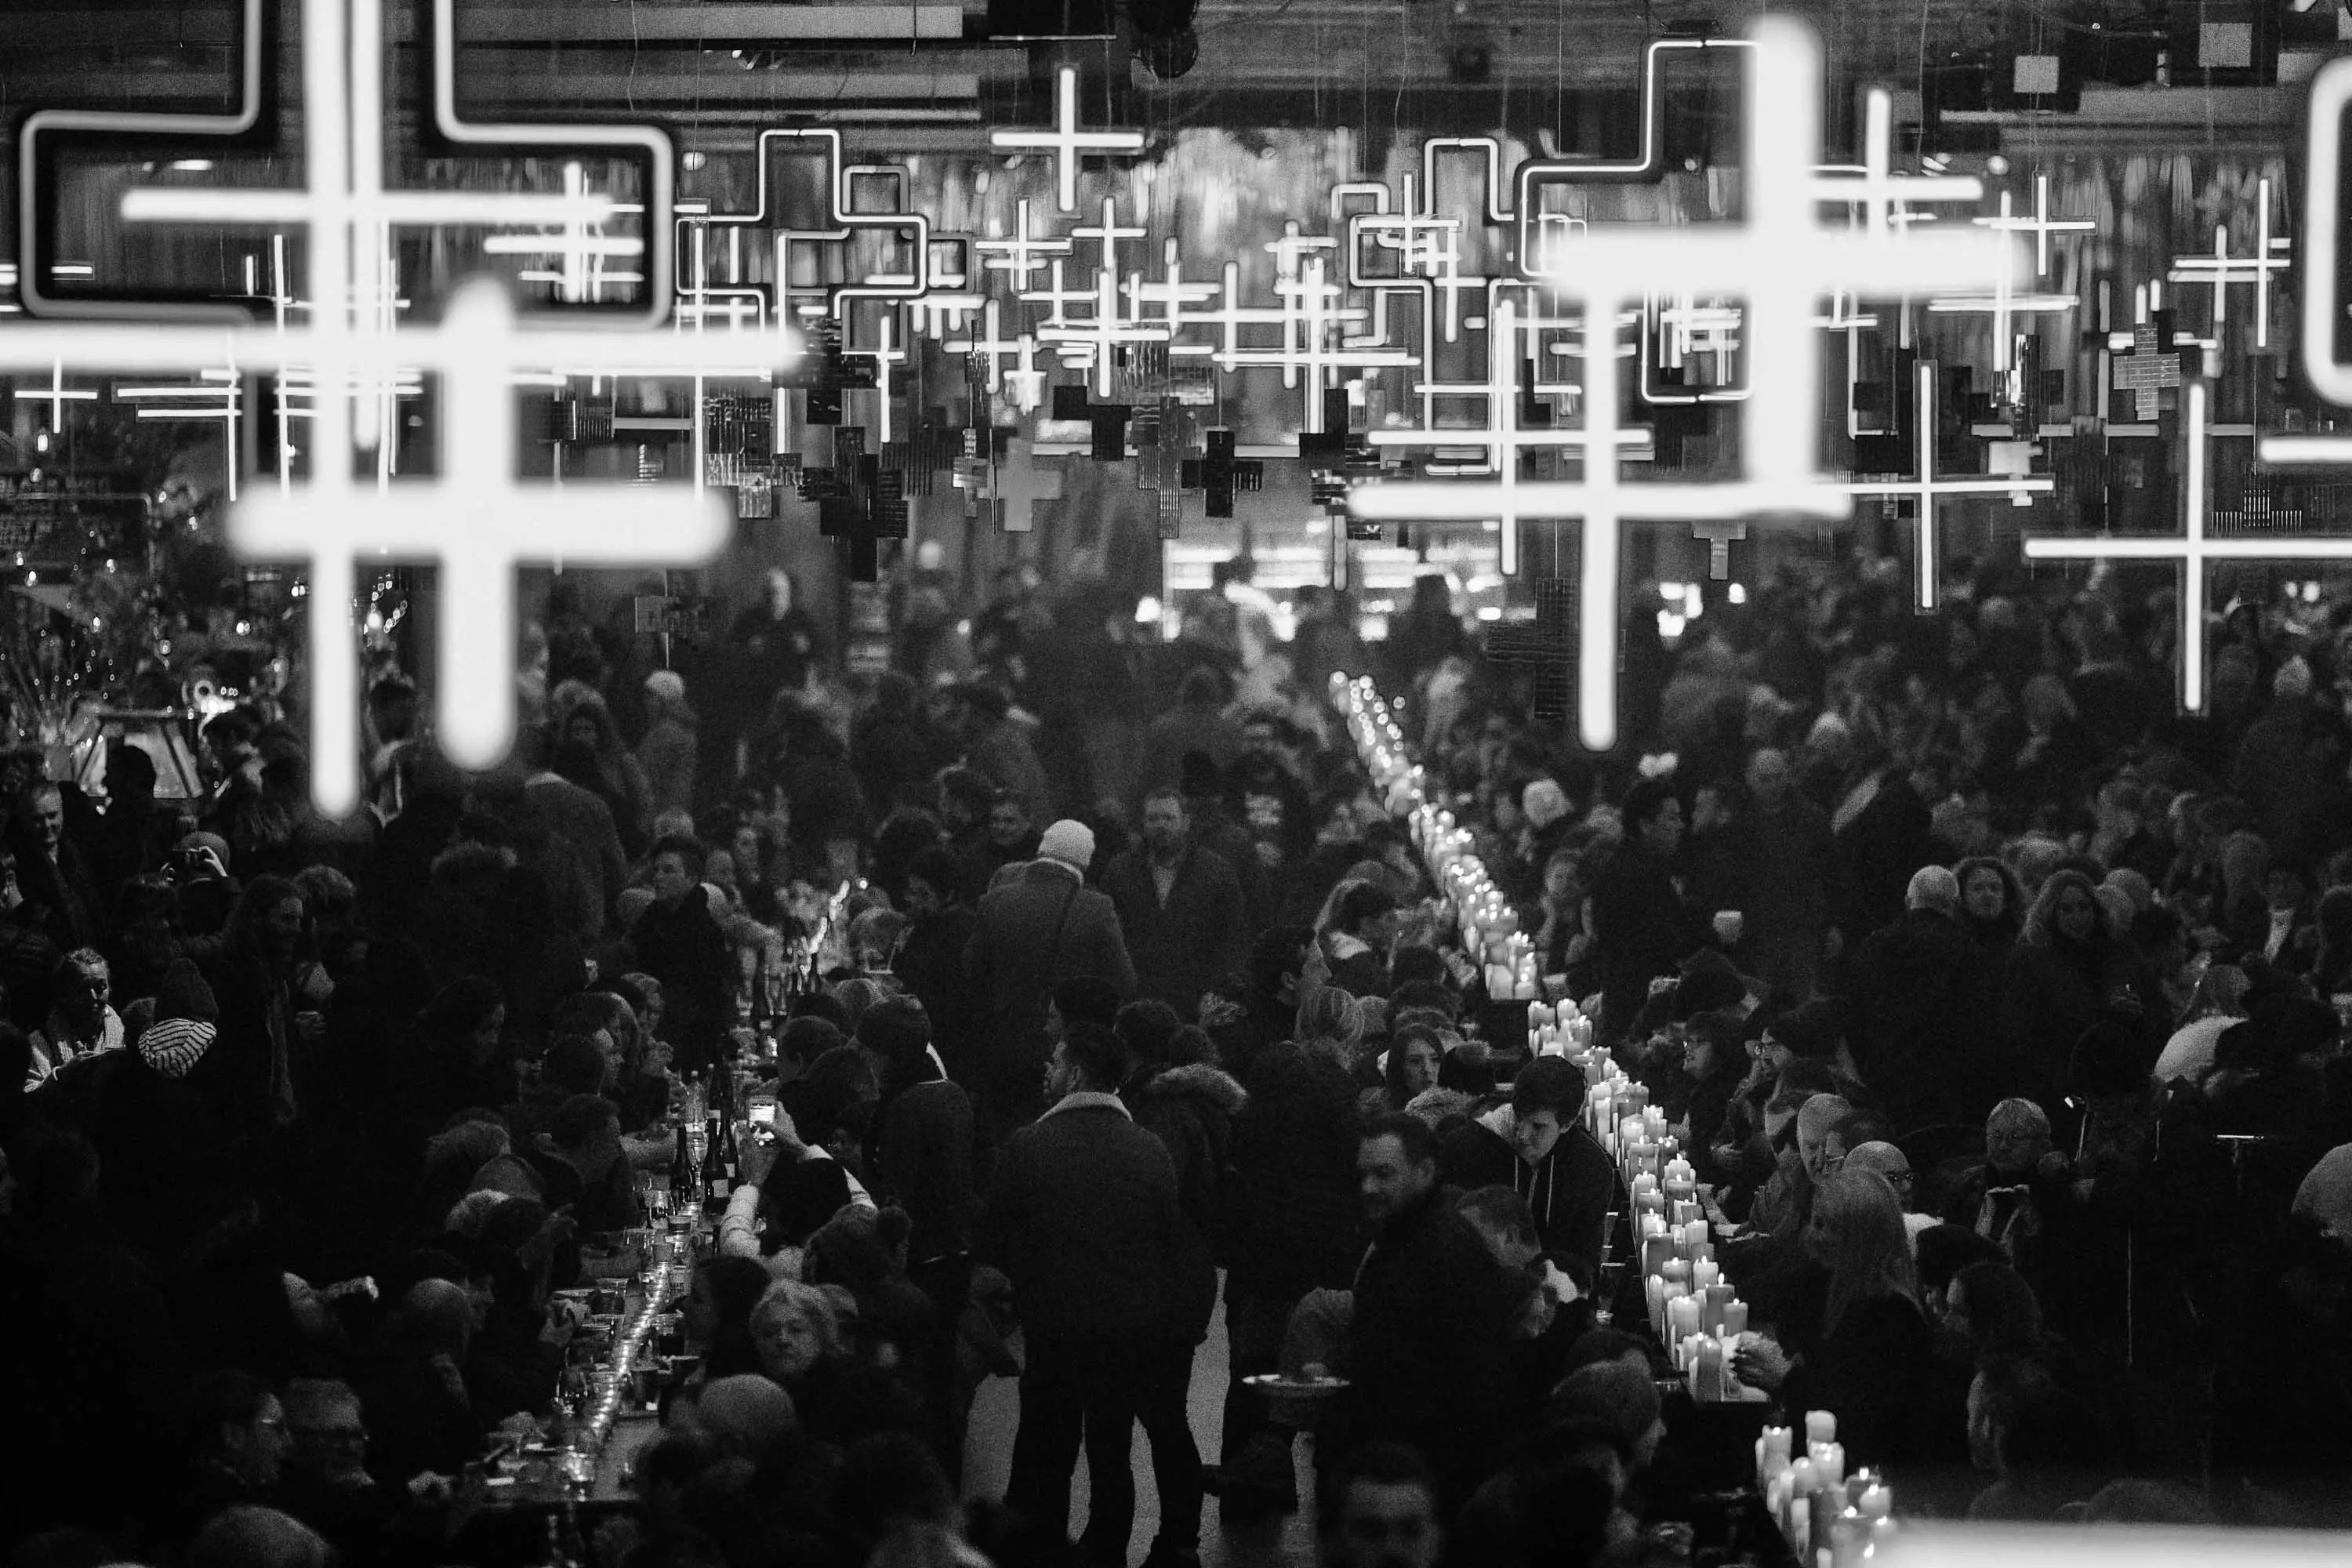 A large converted pier shed is lined with long tables. Thousands of people sit along them, eating food to candlelight. Hundreds of large cross shaped lights are suspended overhead.